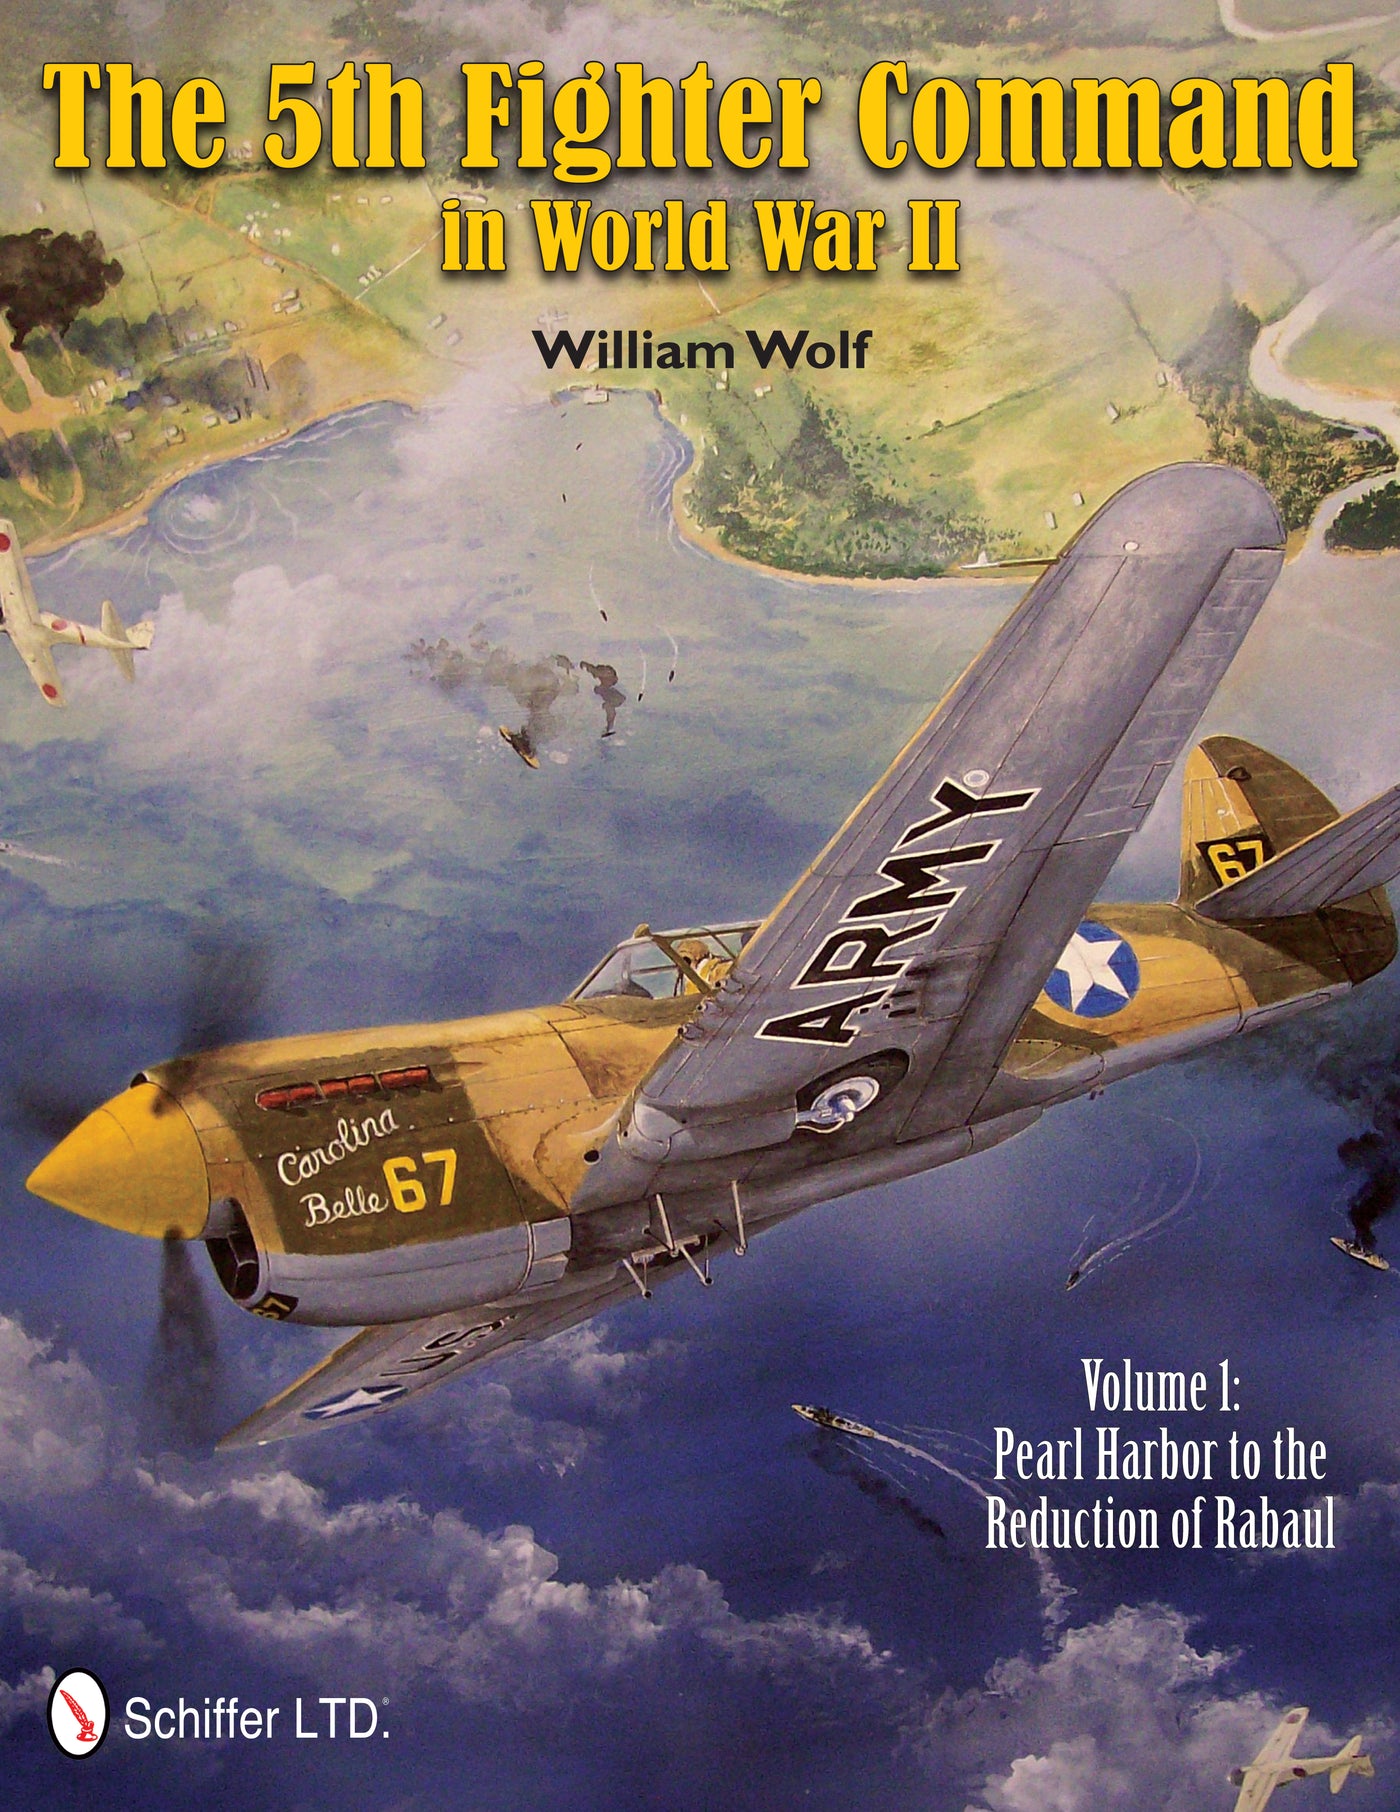 The 5th Fighter Command in World War II